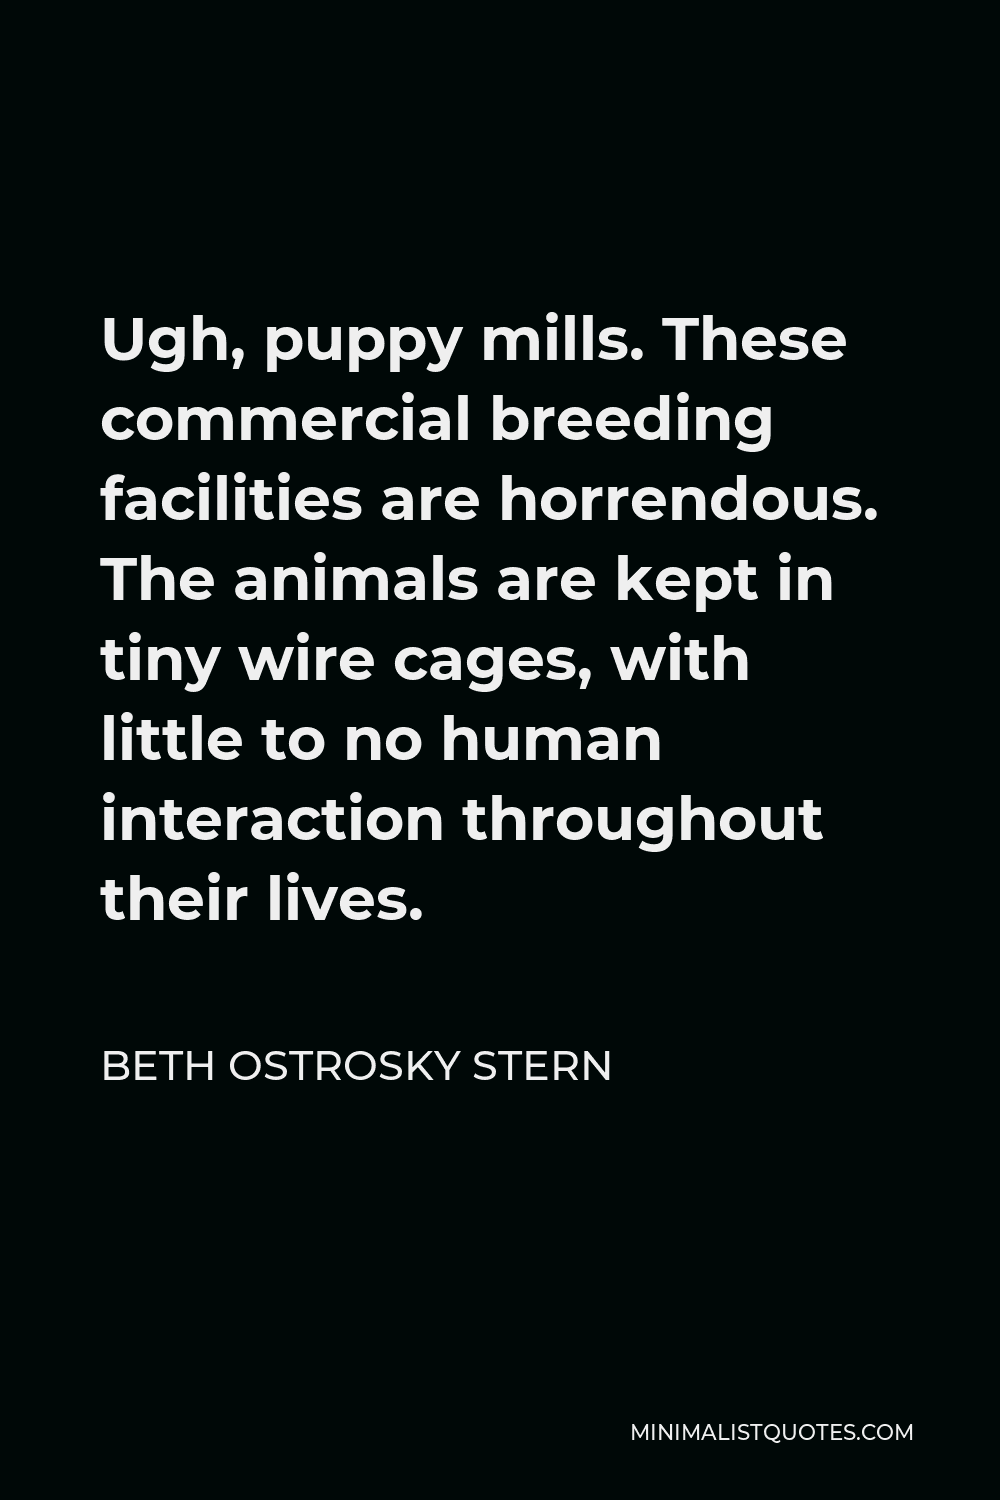 Beth Ostrosky Stern Quote - Ugh, puppy mills. These commercial breeding facilities are horrendous. The animals are kept in tiny wire cages, with little to no human interaction throughout their lives.